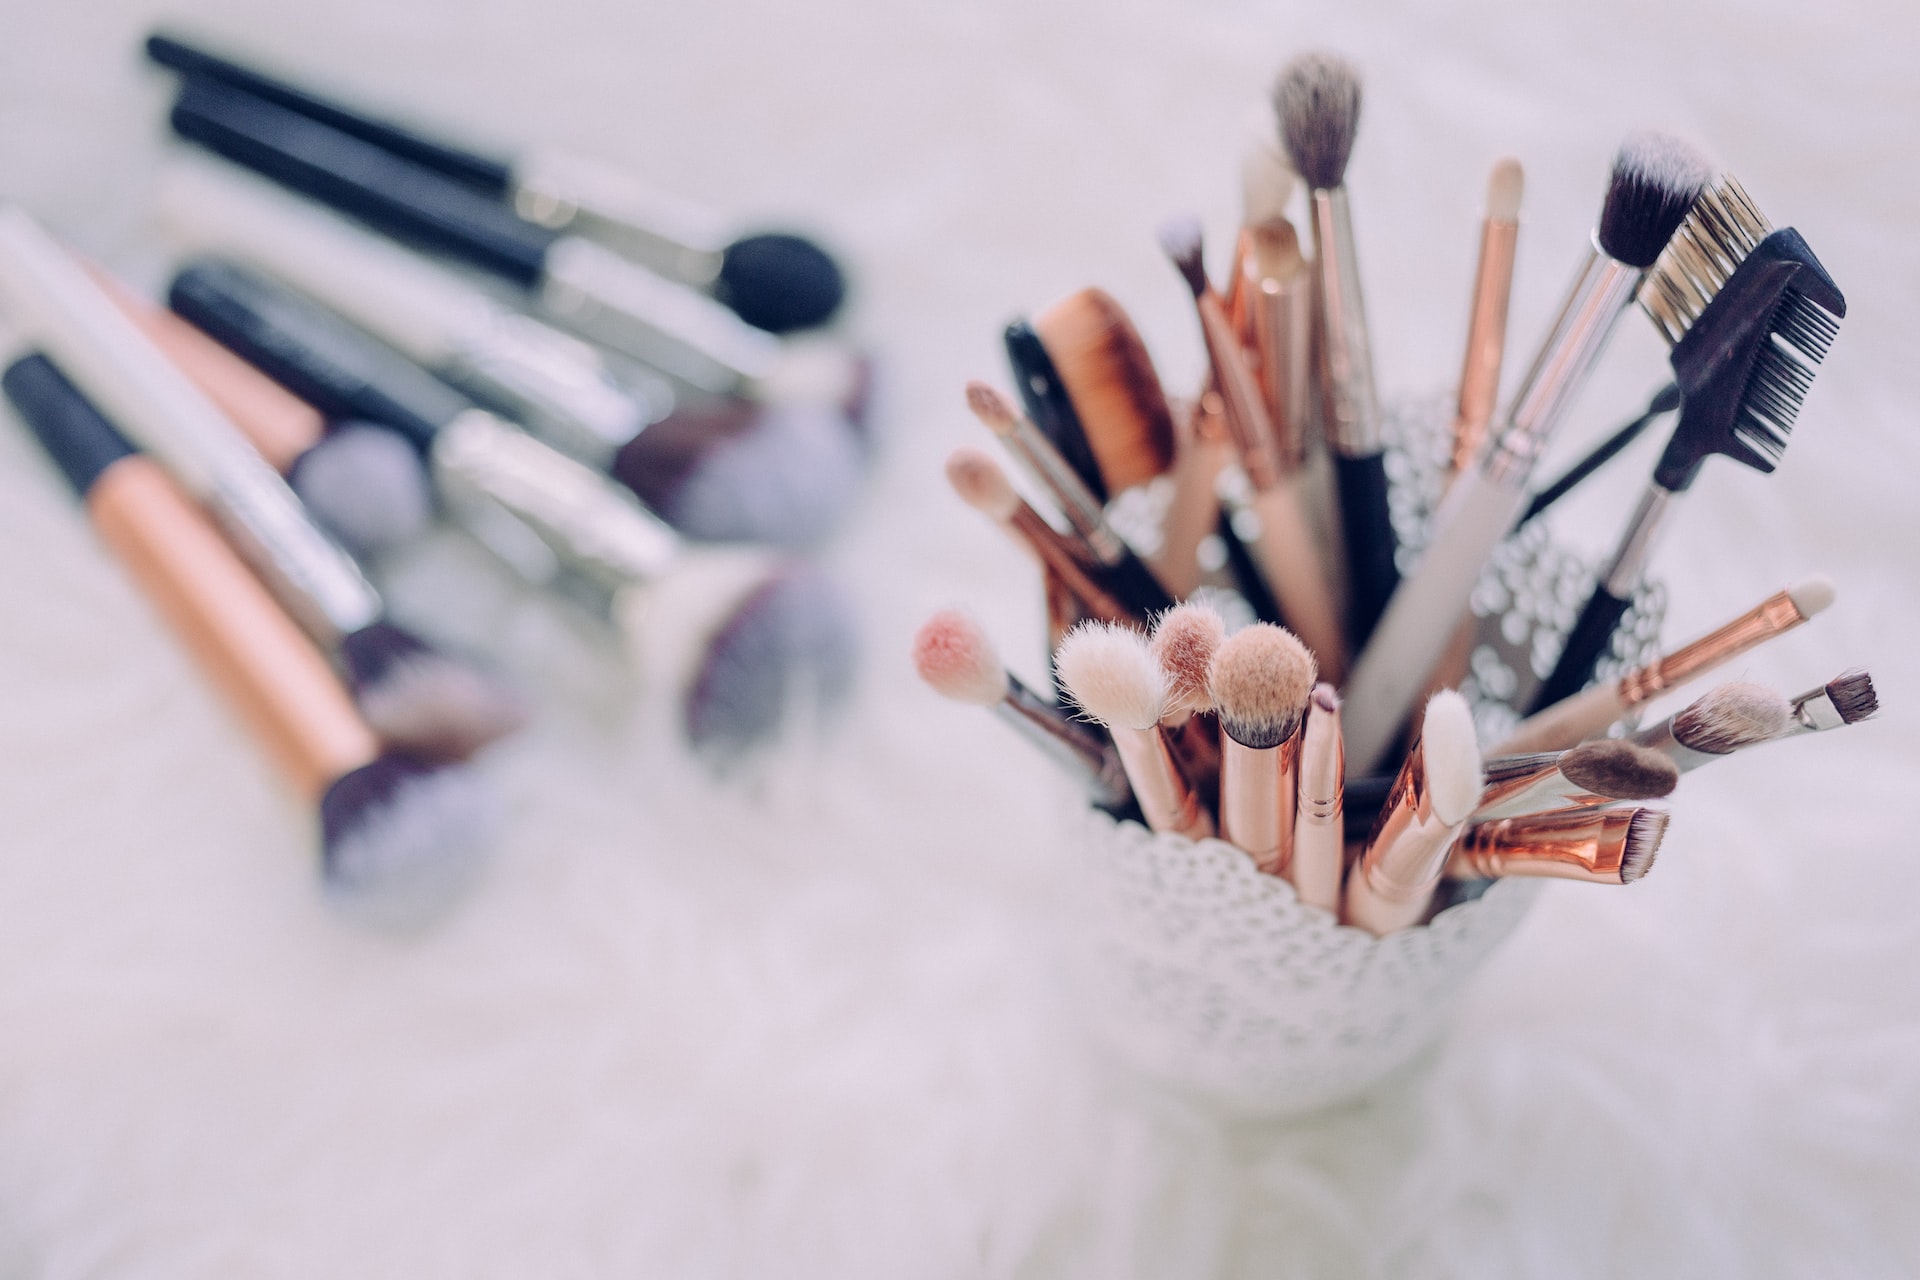 Pinterest For Beauty Influencers: How To Use It To Increase Your Following And Promote Your Brand